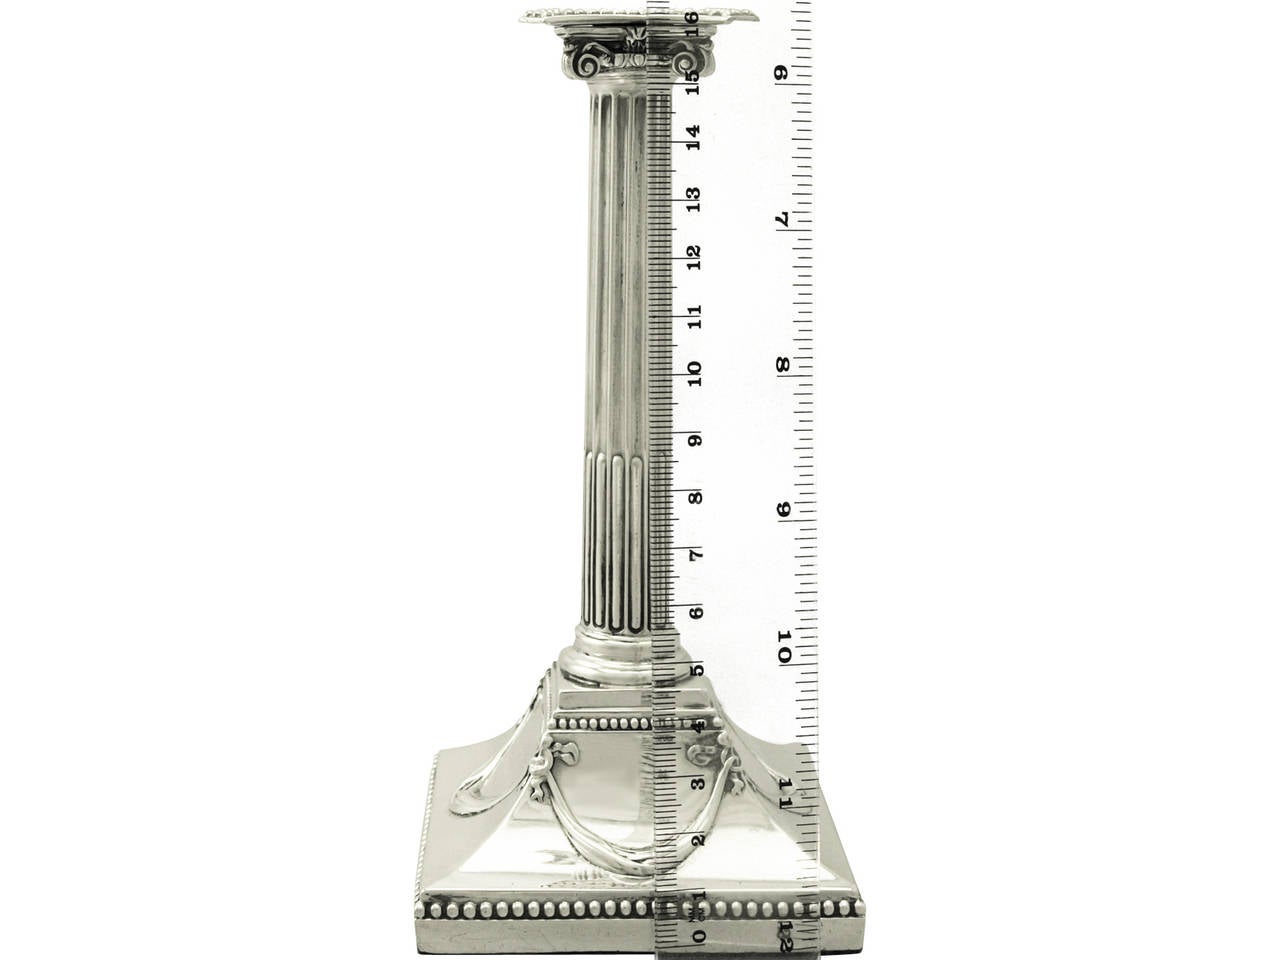 A fine and impressive antique George III English sterling silver Corinthian column taper candlestick; part of our ornamental Georgian silverware collection.

This fine antique George III sterling silver taper candlestick has an impressive